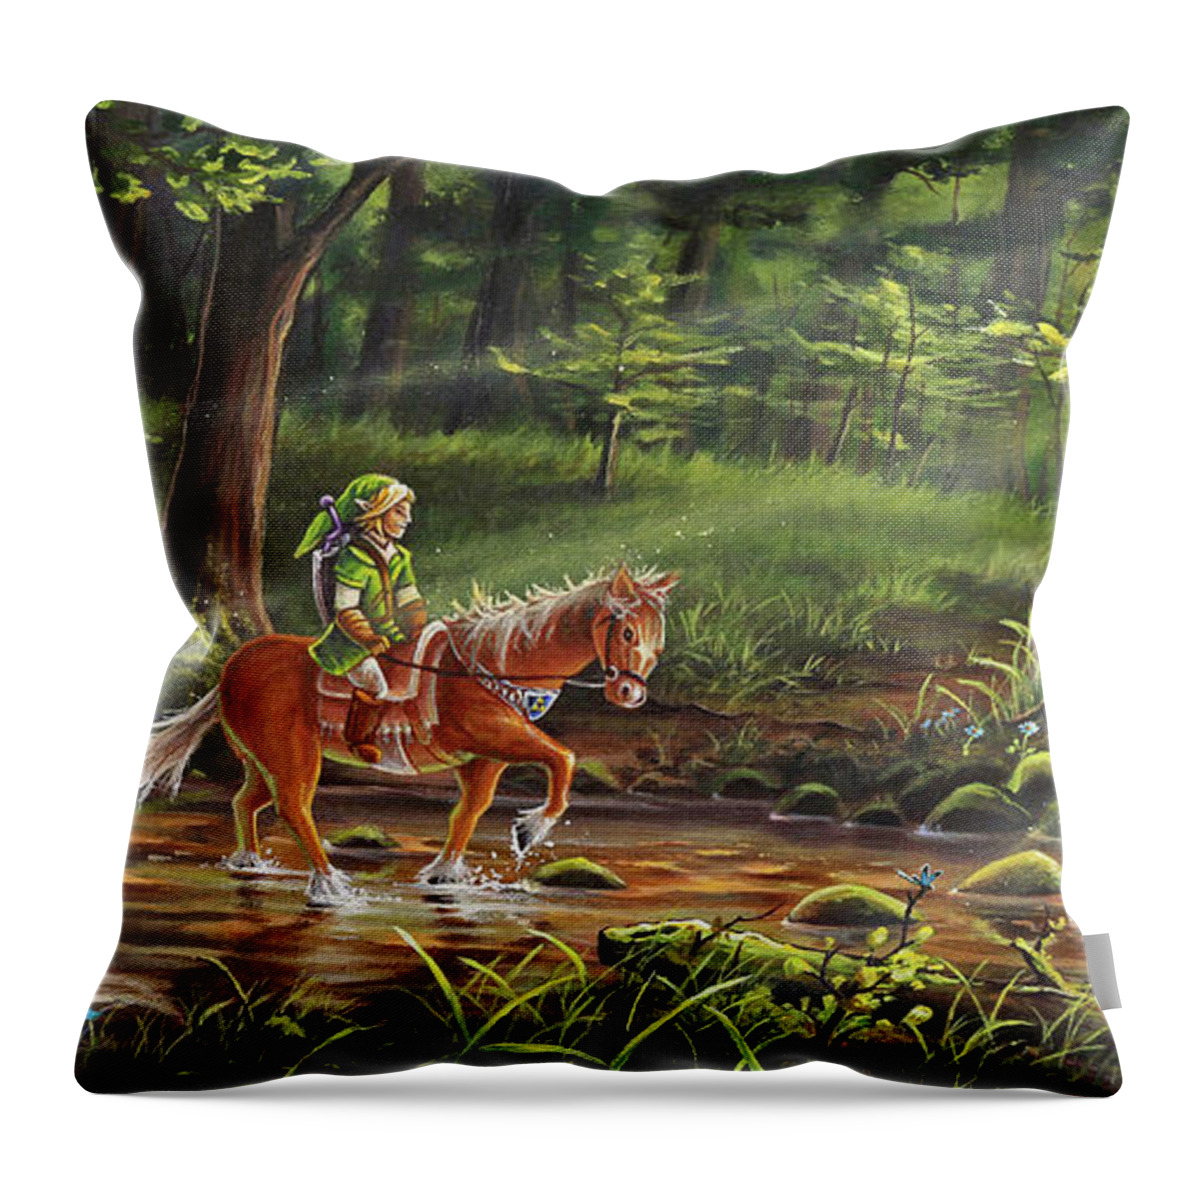 Landscape Throw Pillow featuring the painting The Journey Begins by Joe Mandrick